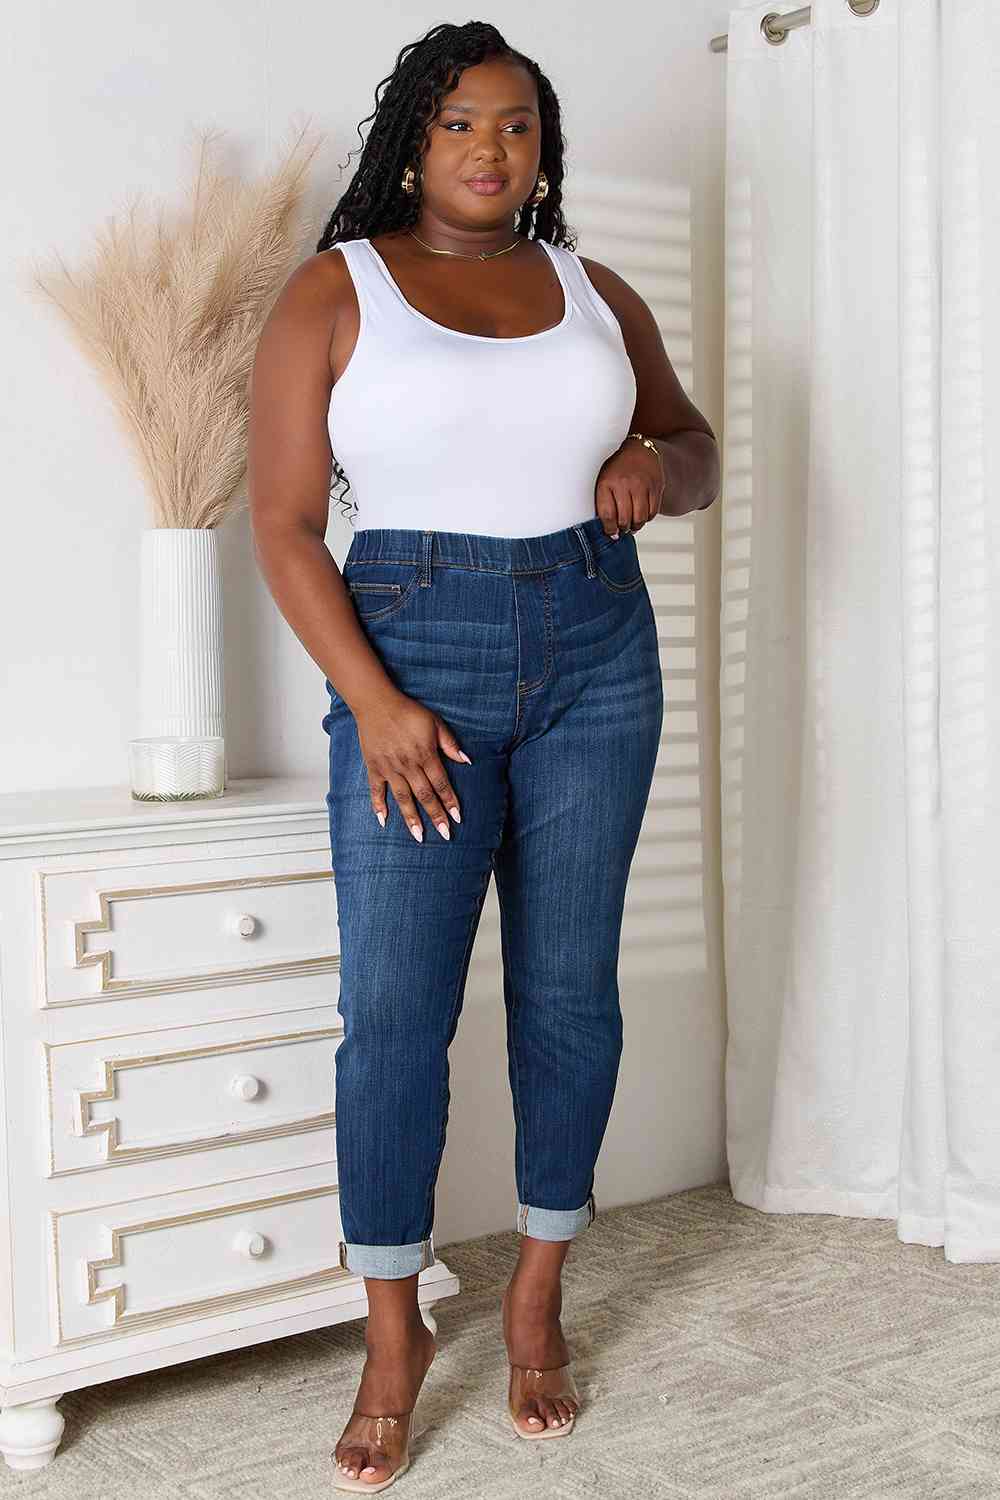 JUDY BLUE Full Size Basic Style Skinny Cropped Jeans